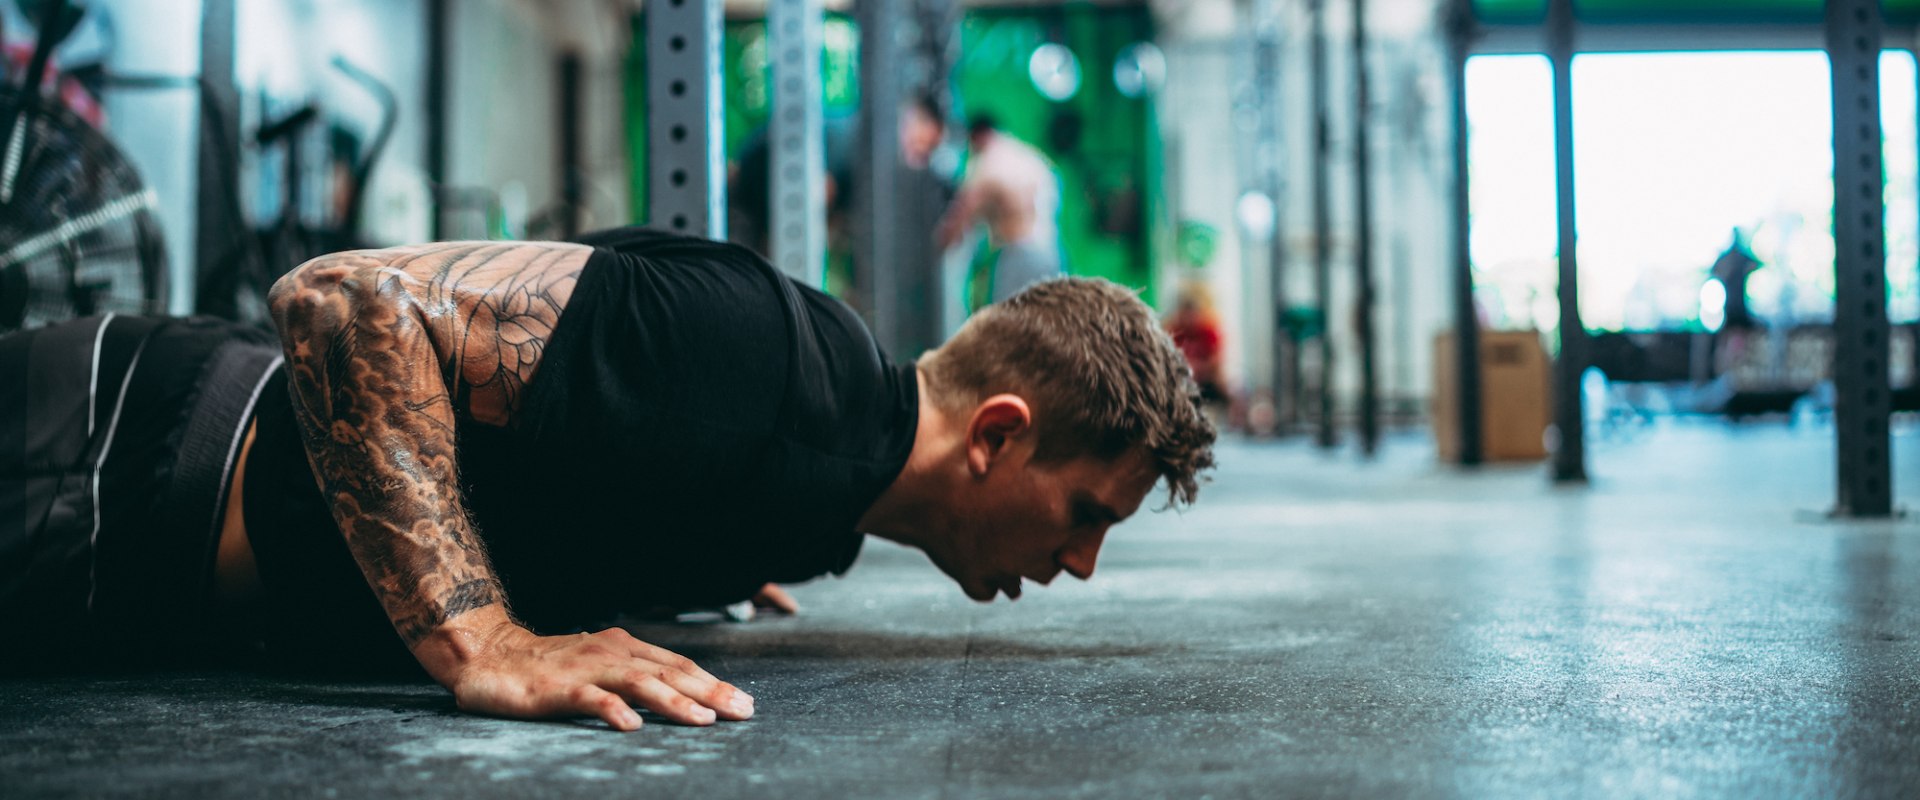 Burpees - A Comprehensive Overview of a Bodyweight Exercise